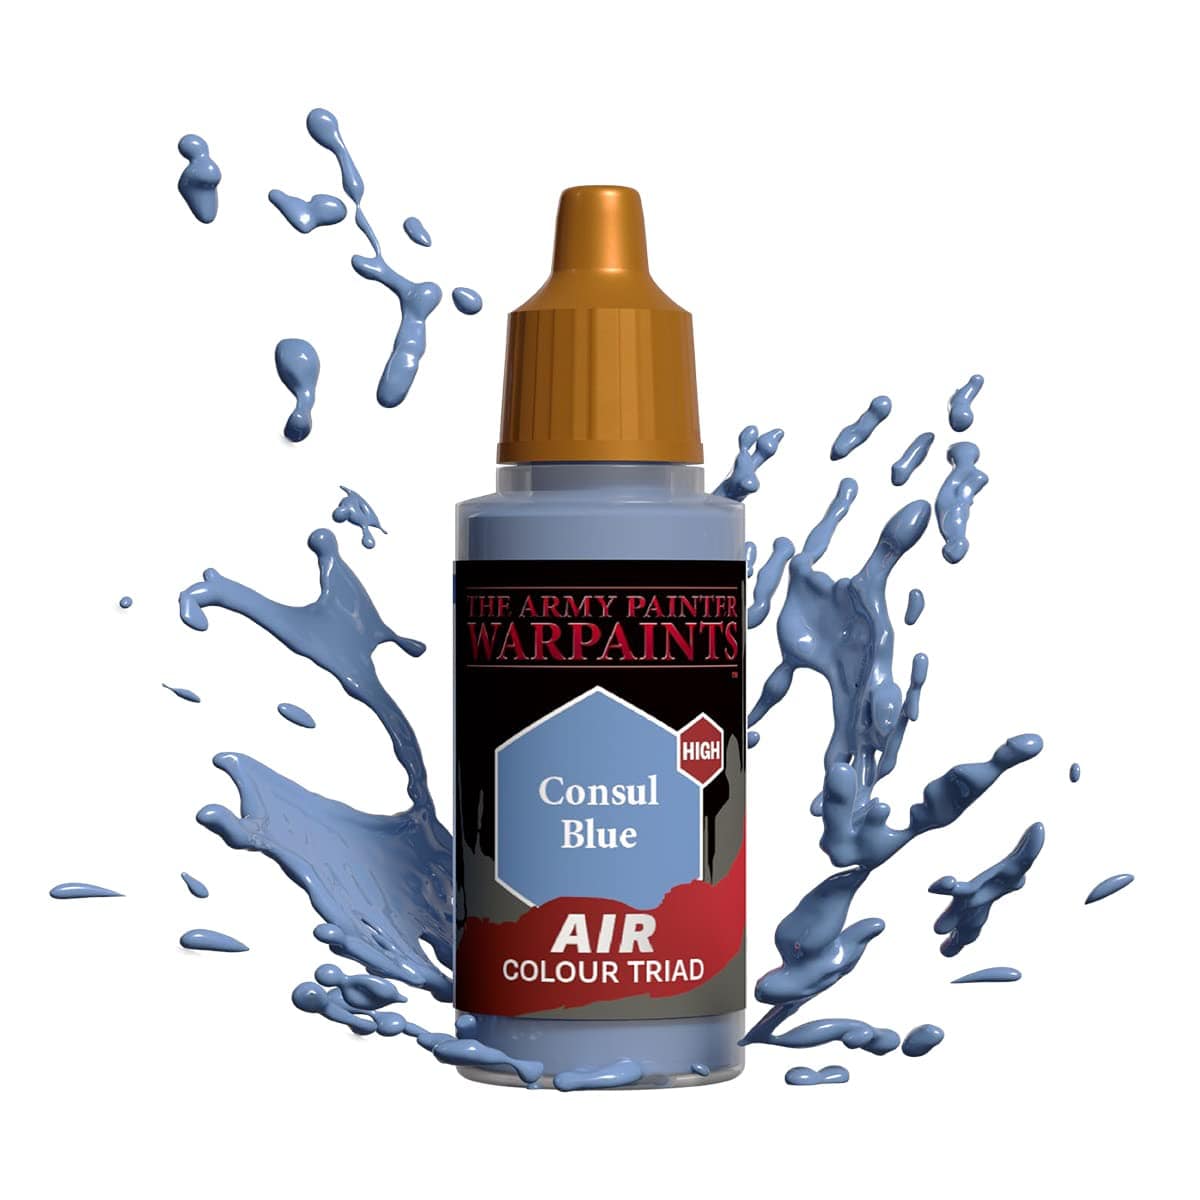 The Army Painter Accessories The Army Painter Warpaints Air: Consul Blue 18ml